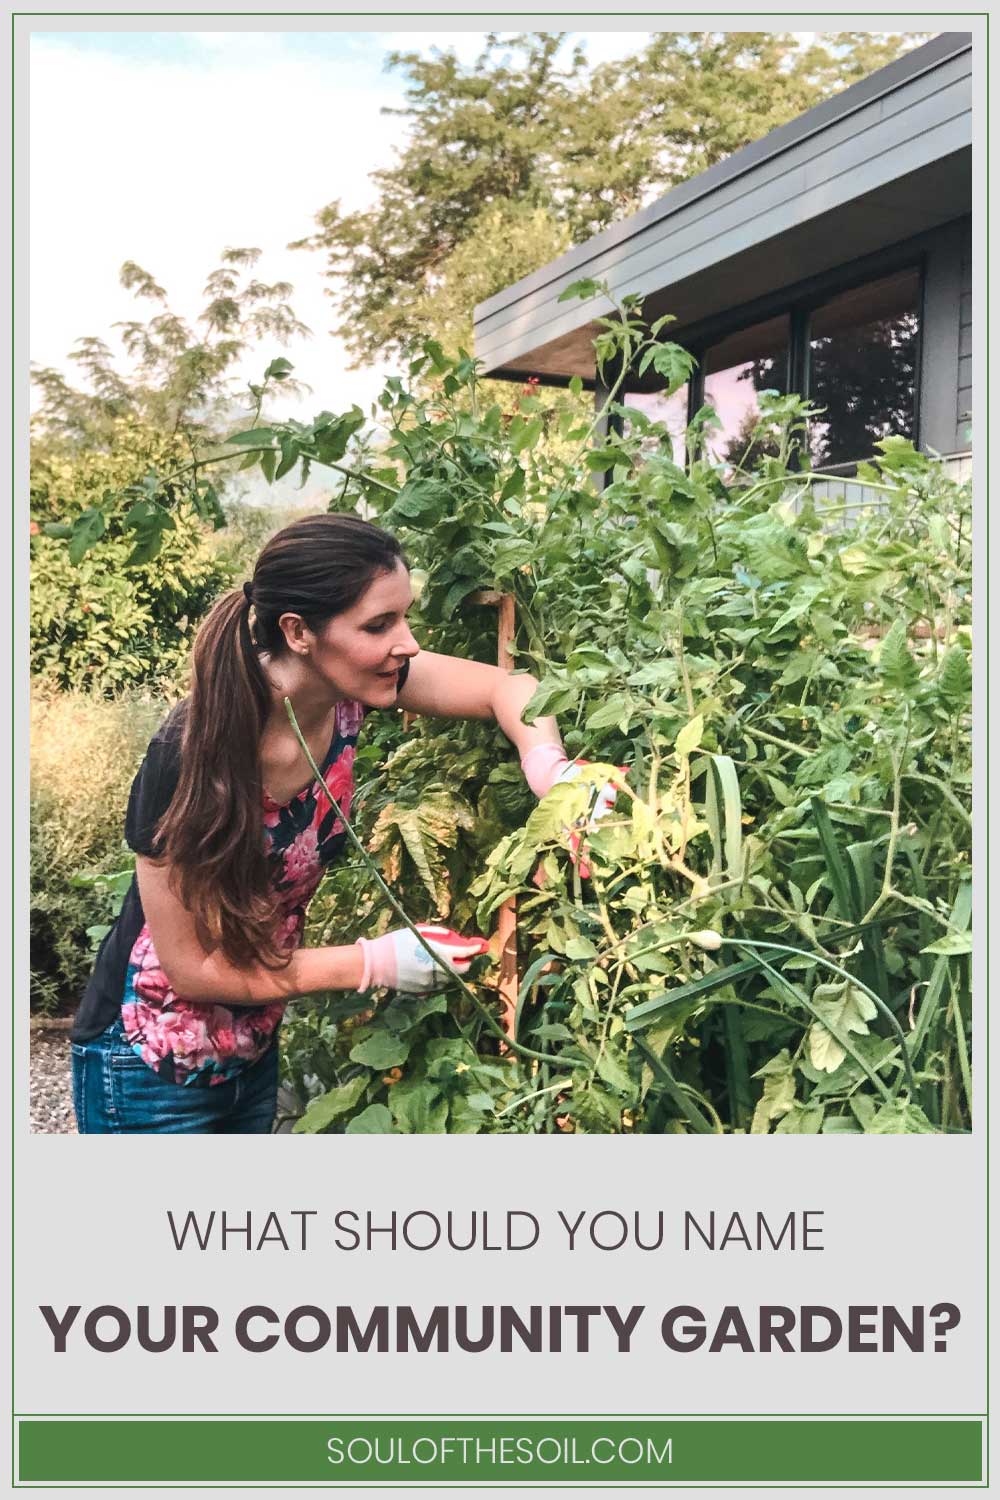 Woman working in a garden - What Should You Name Your Community Garden?